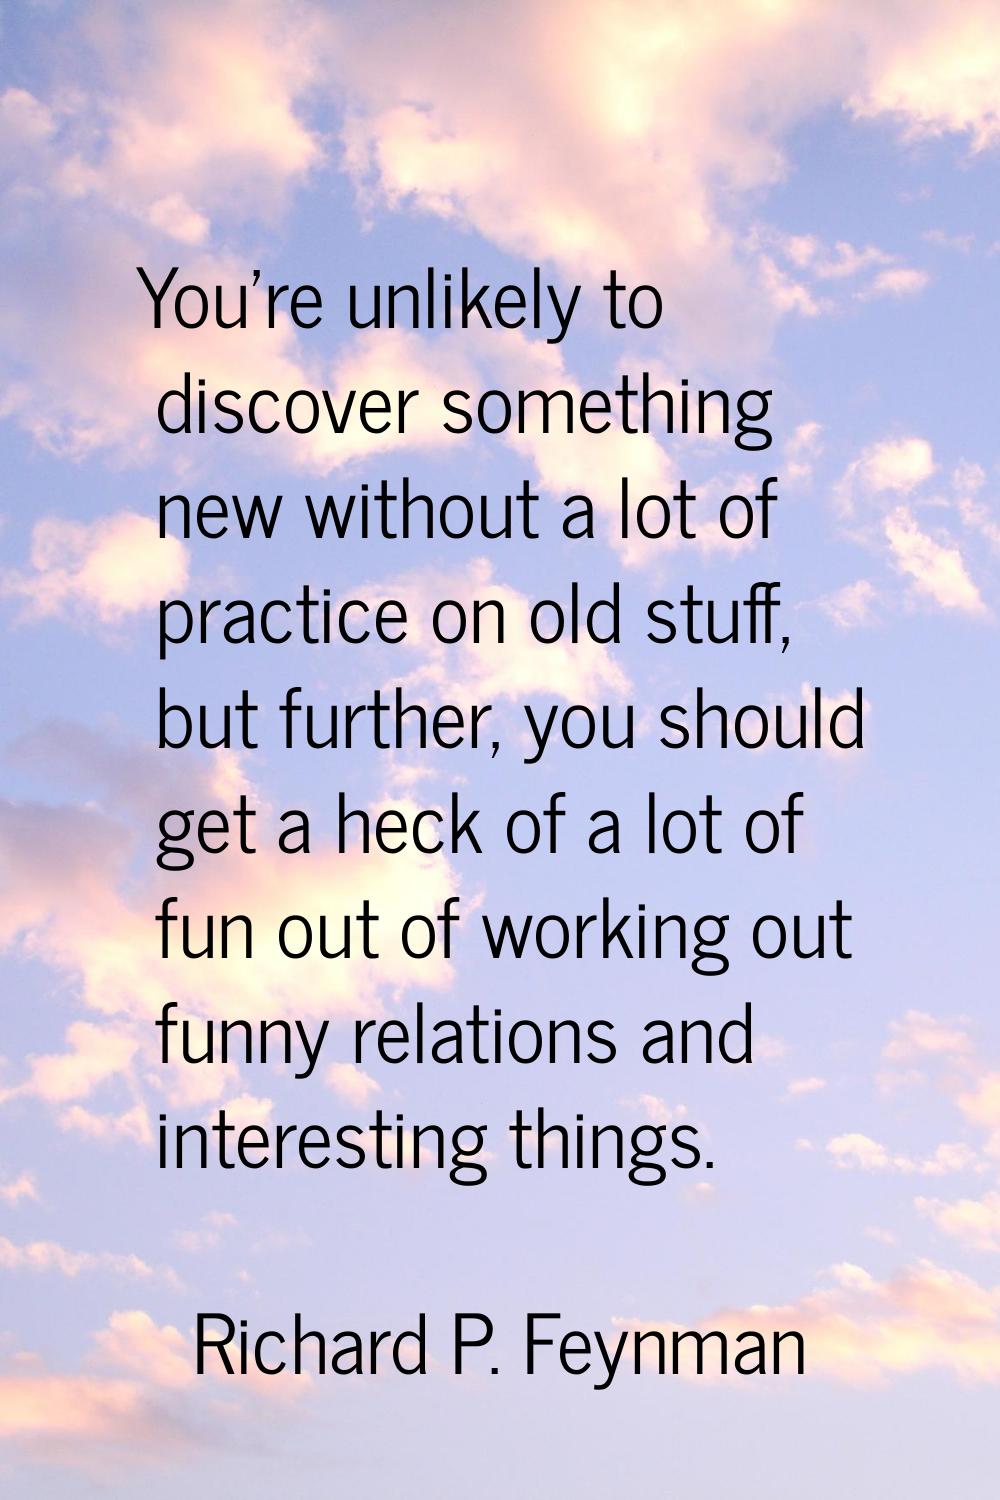 You're unlikely to discover something new without a lot of practice on old stuff, but further, you 